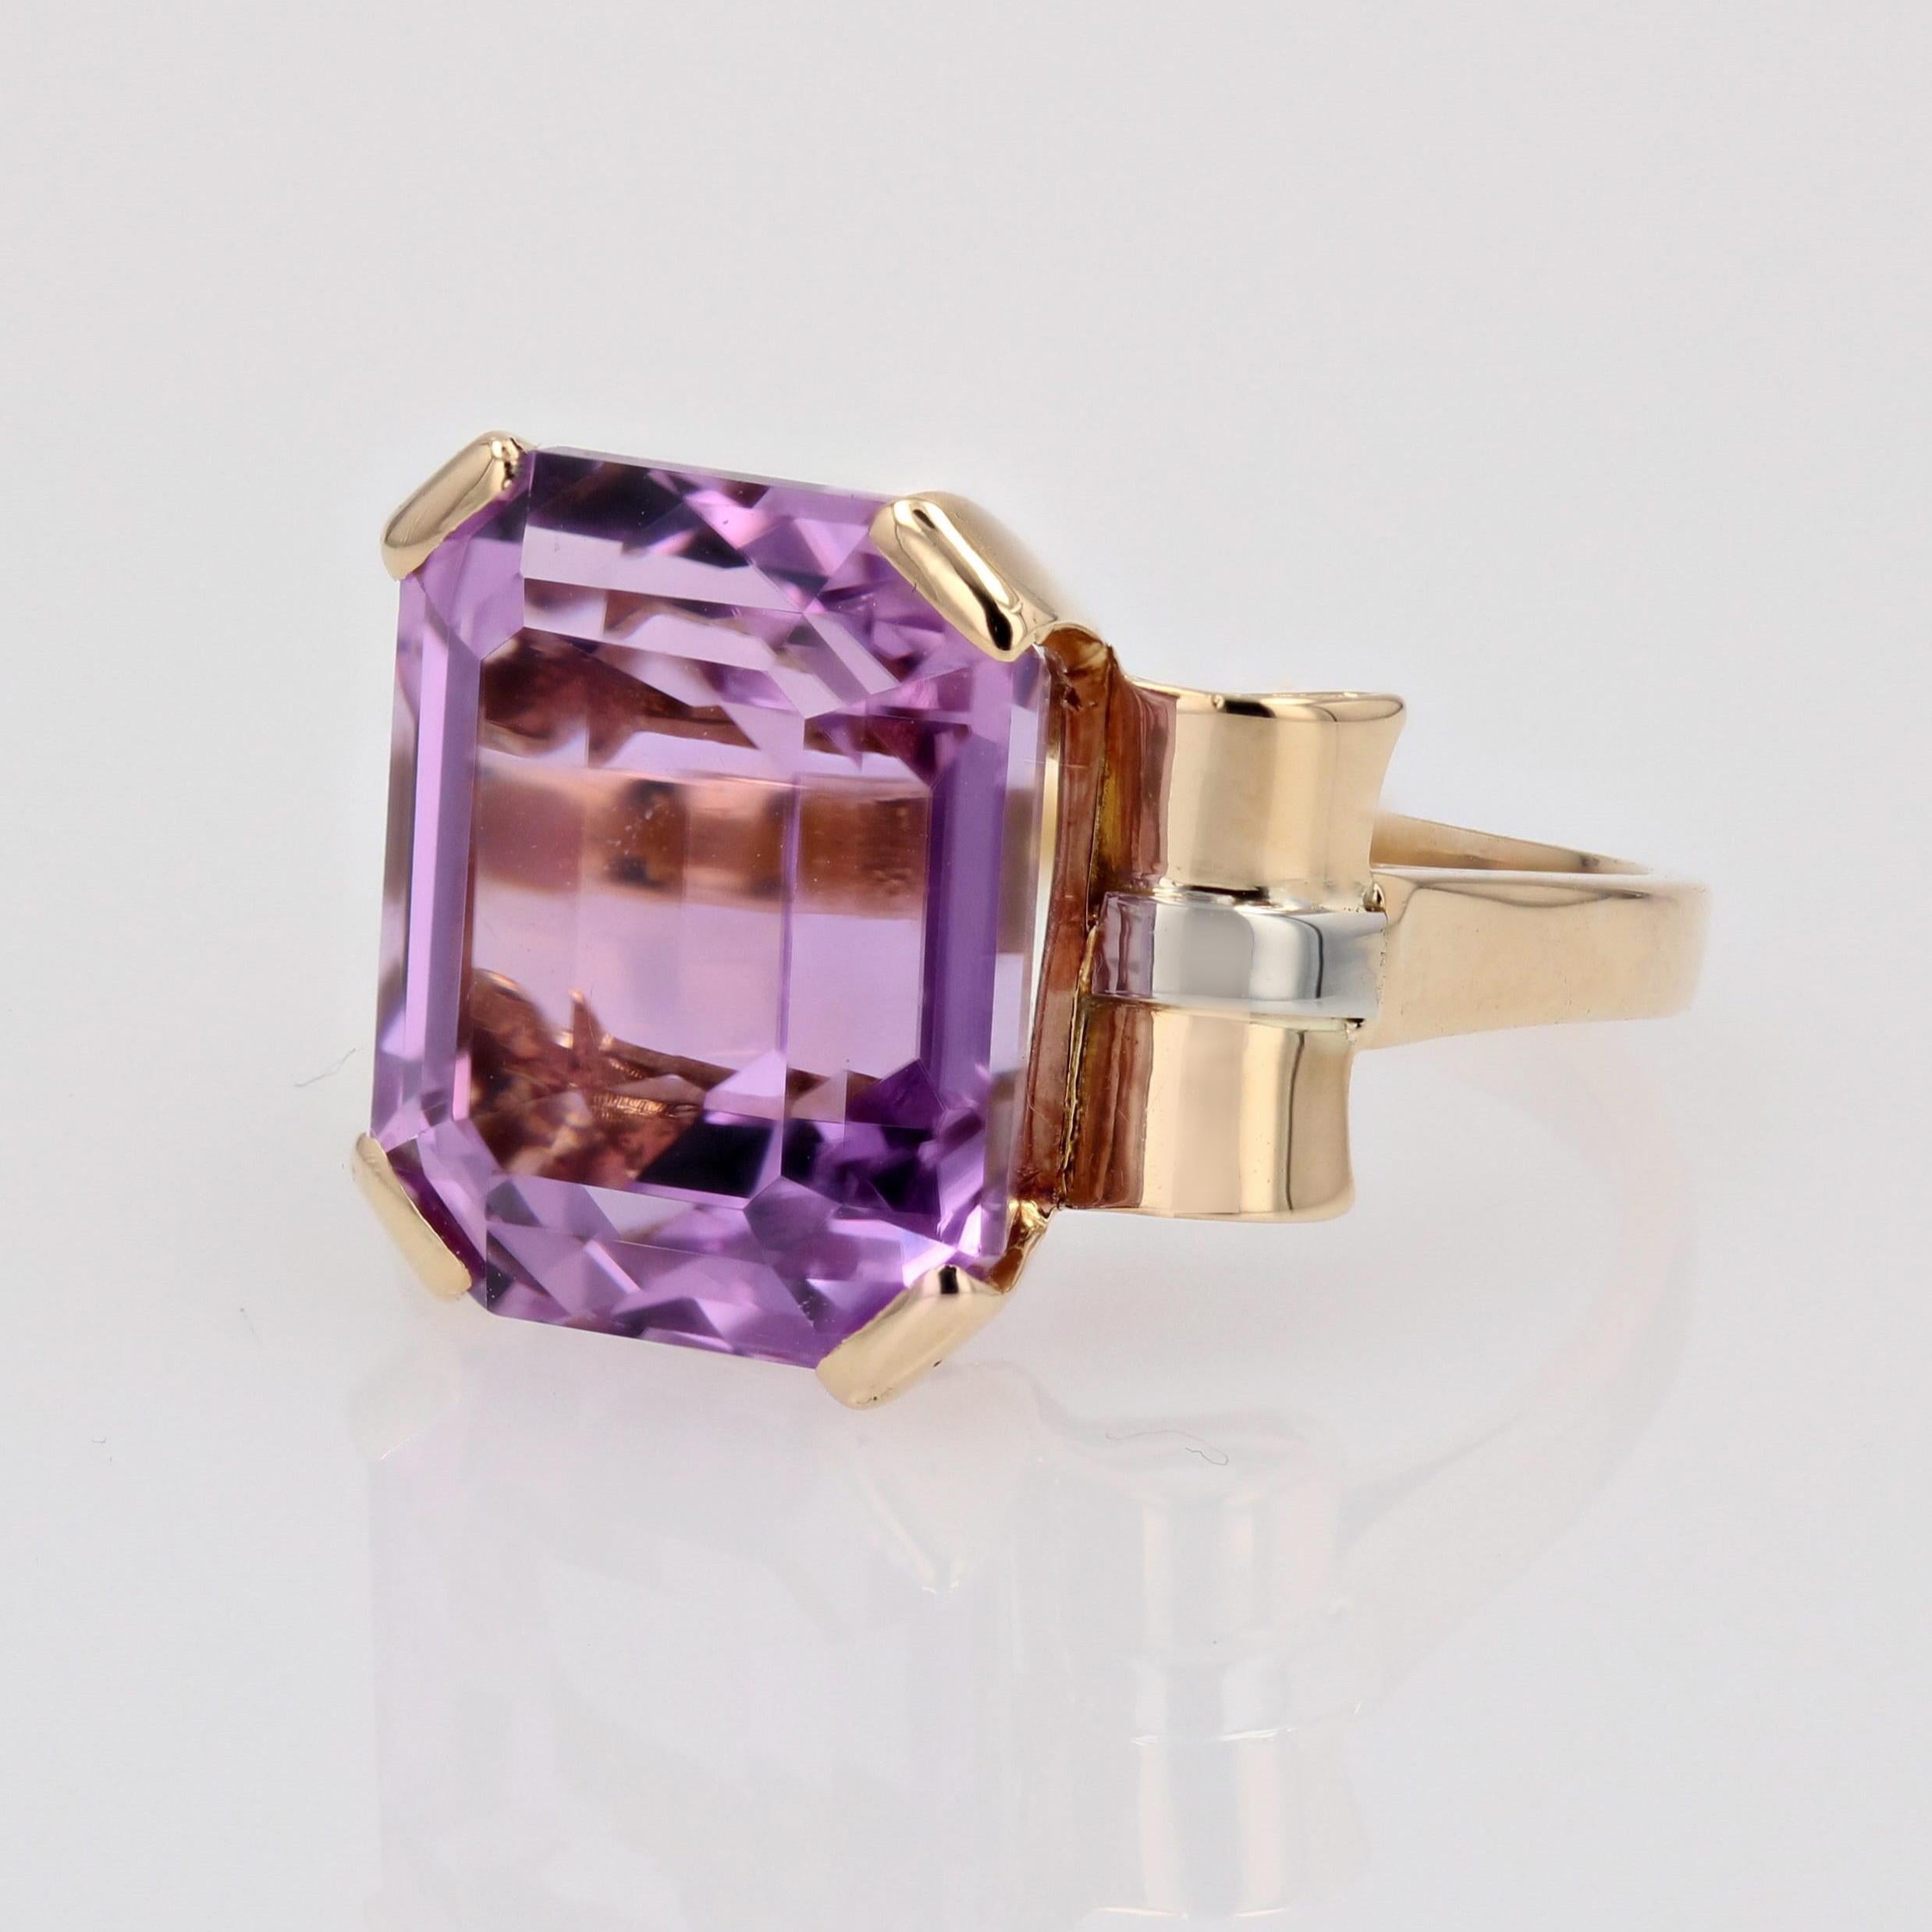 French Retro 1950s 11.29 Carats Kunzite 18 Karat Yellow Gold Cocktail Ring For Sale 3